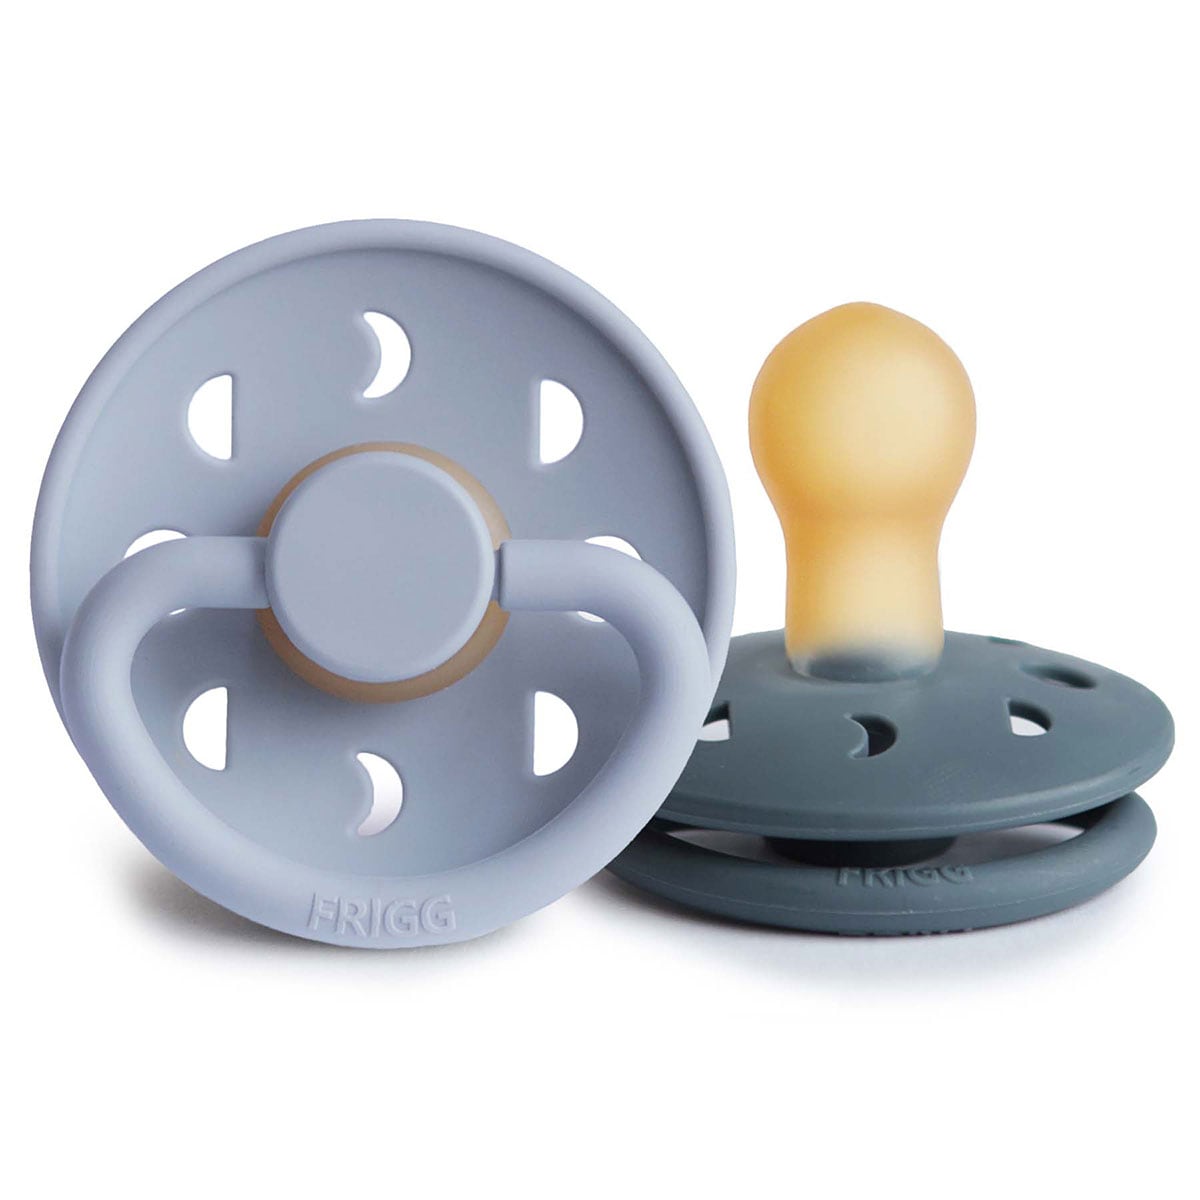 Frigg 0-6 Months Moon Phase Pacifier Powder Blue/Slate 2 Pack